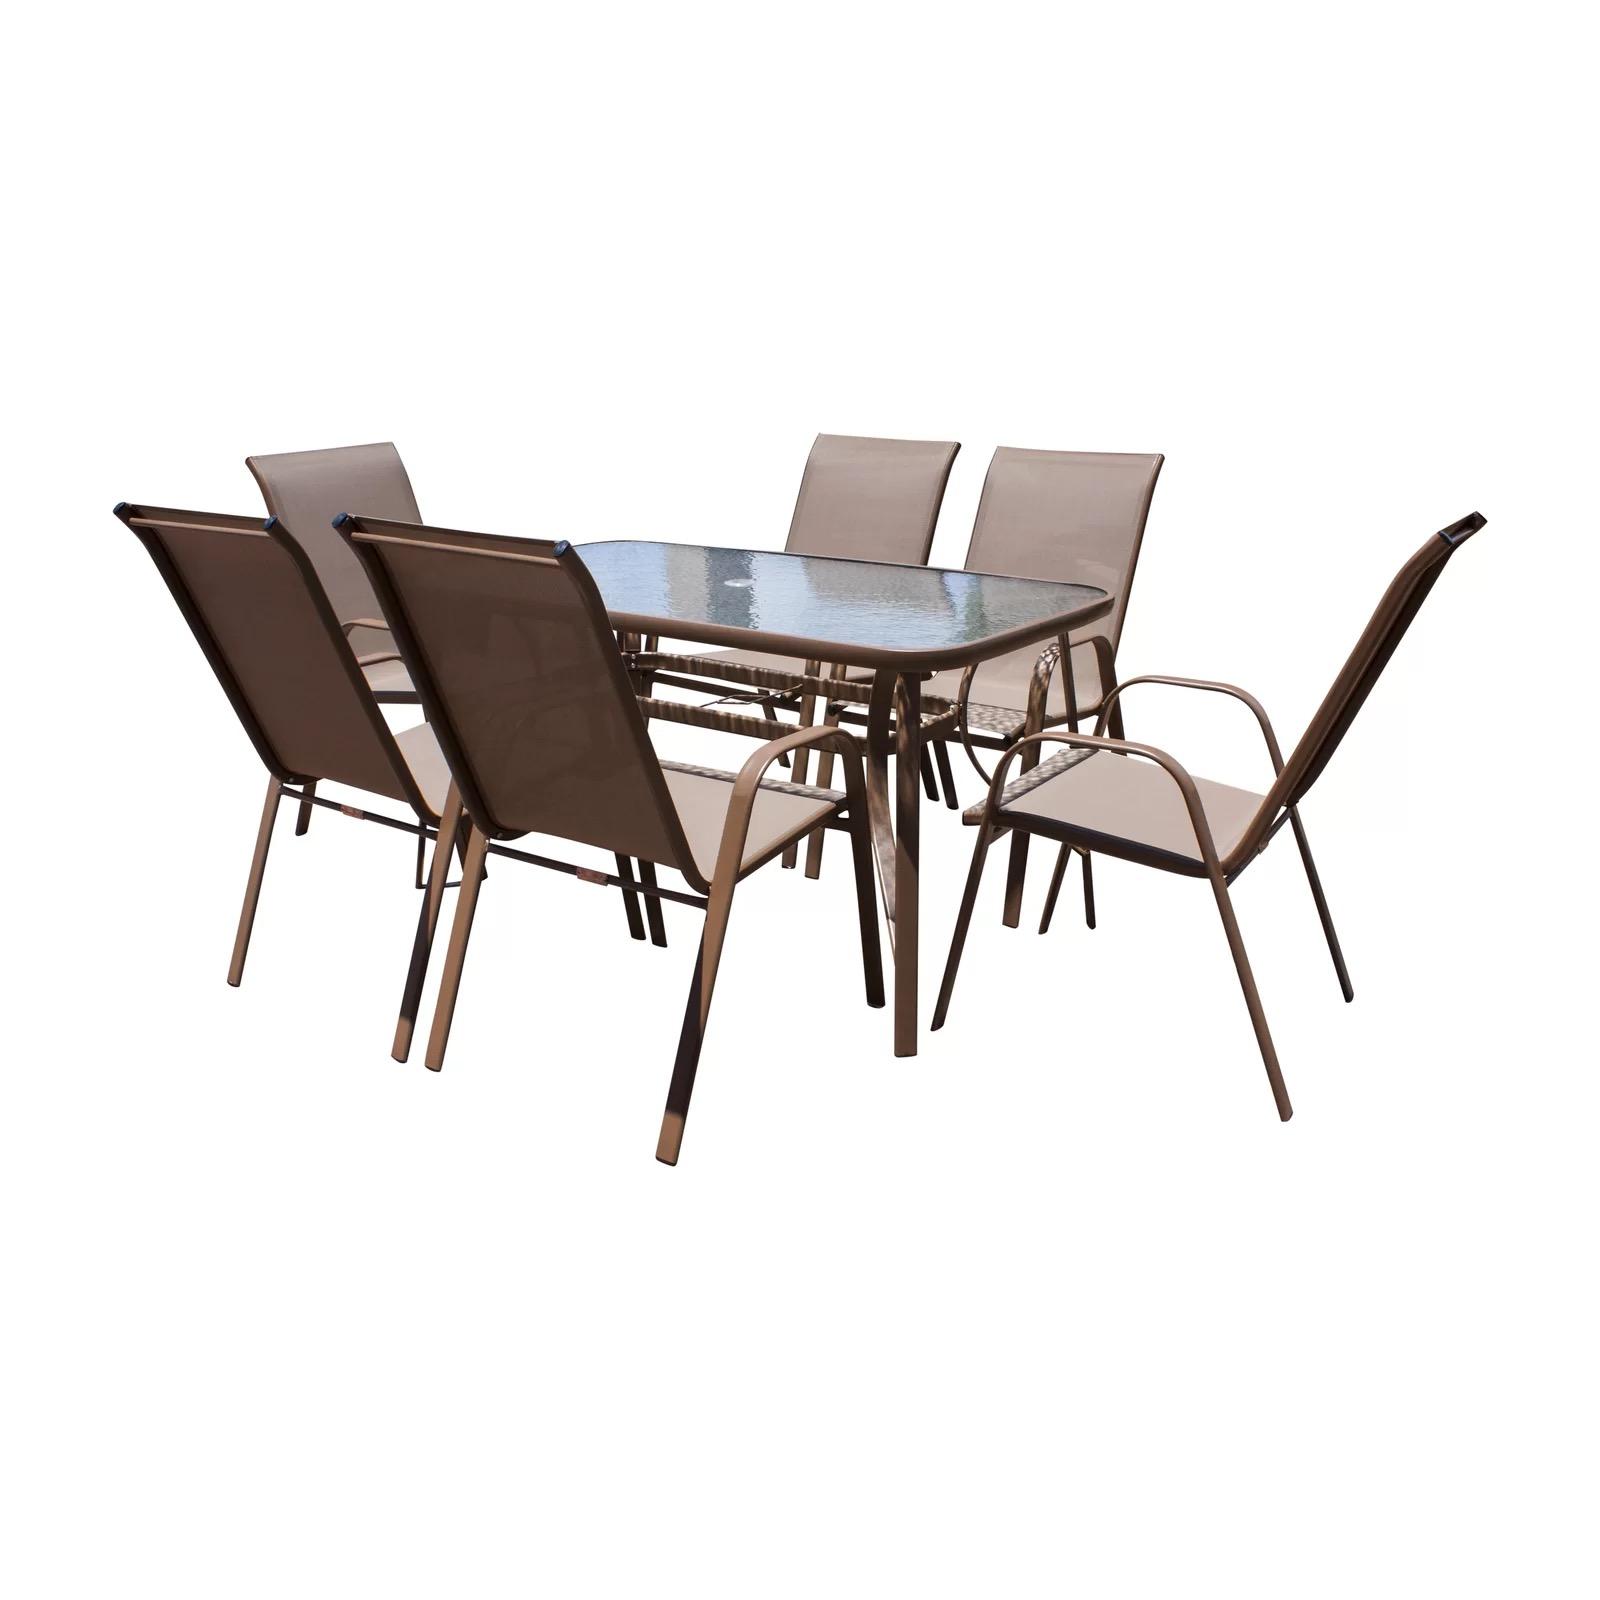 Classic Outdoors Dining Set Café PJO-9001-ESP-7DH in Brown 